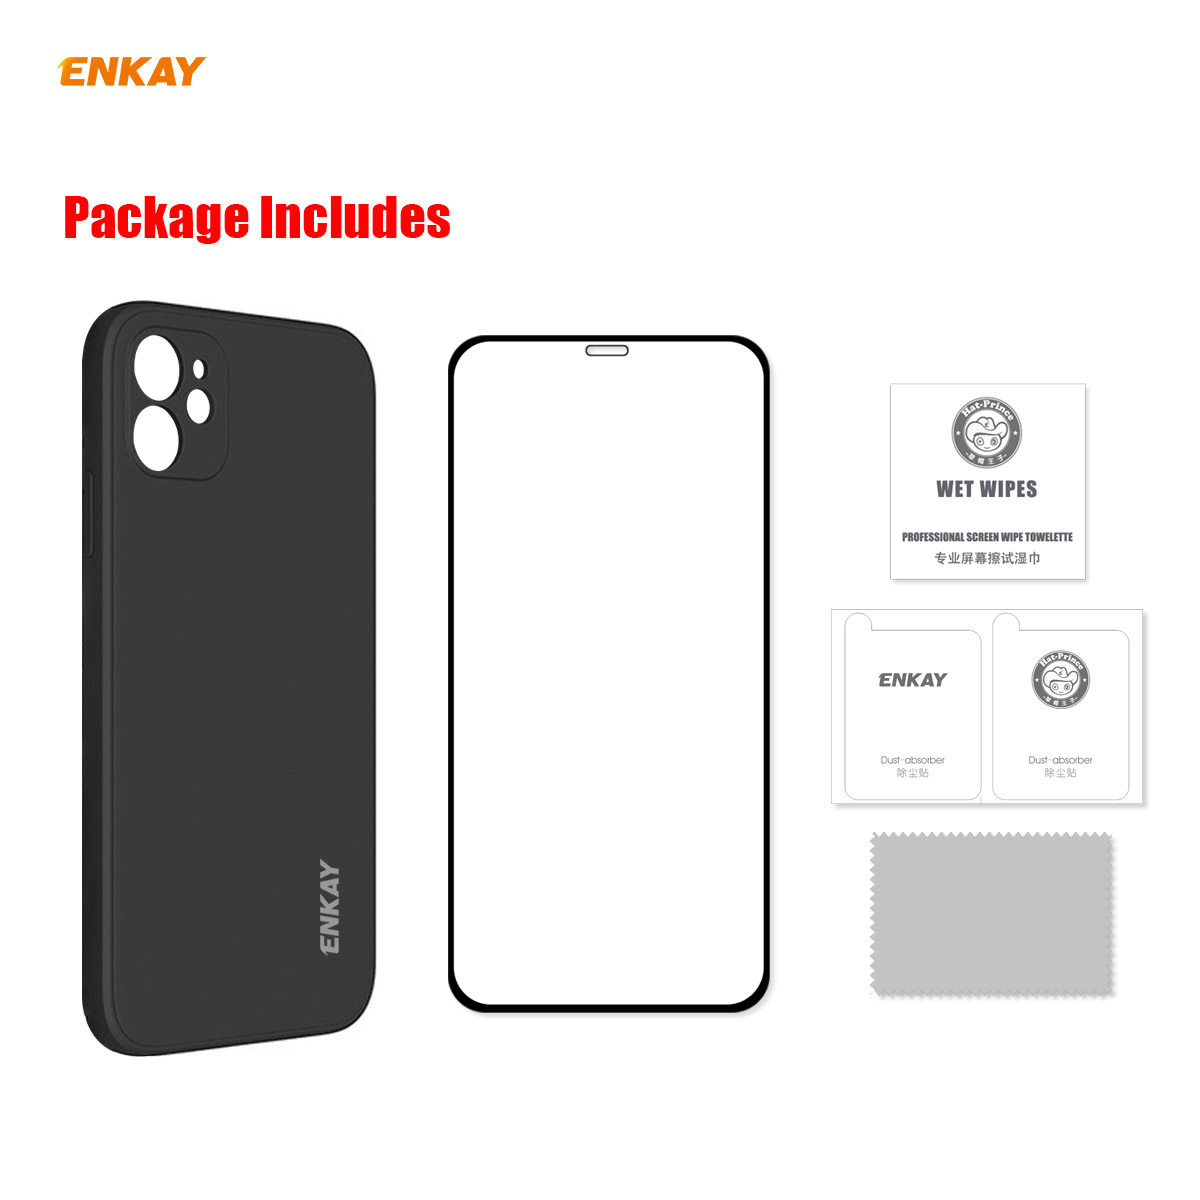 Enkay-2-in-1-for-iPhone-12-Accessories-Shockproof-with-Lens-Protector-Soft-Liquid-Silicone-Rubber-Pr-1772523-9